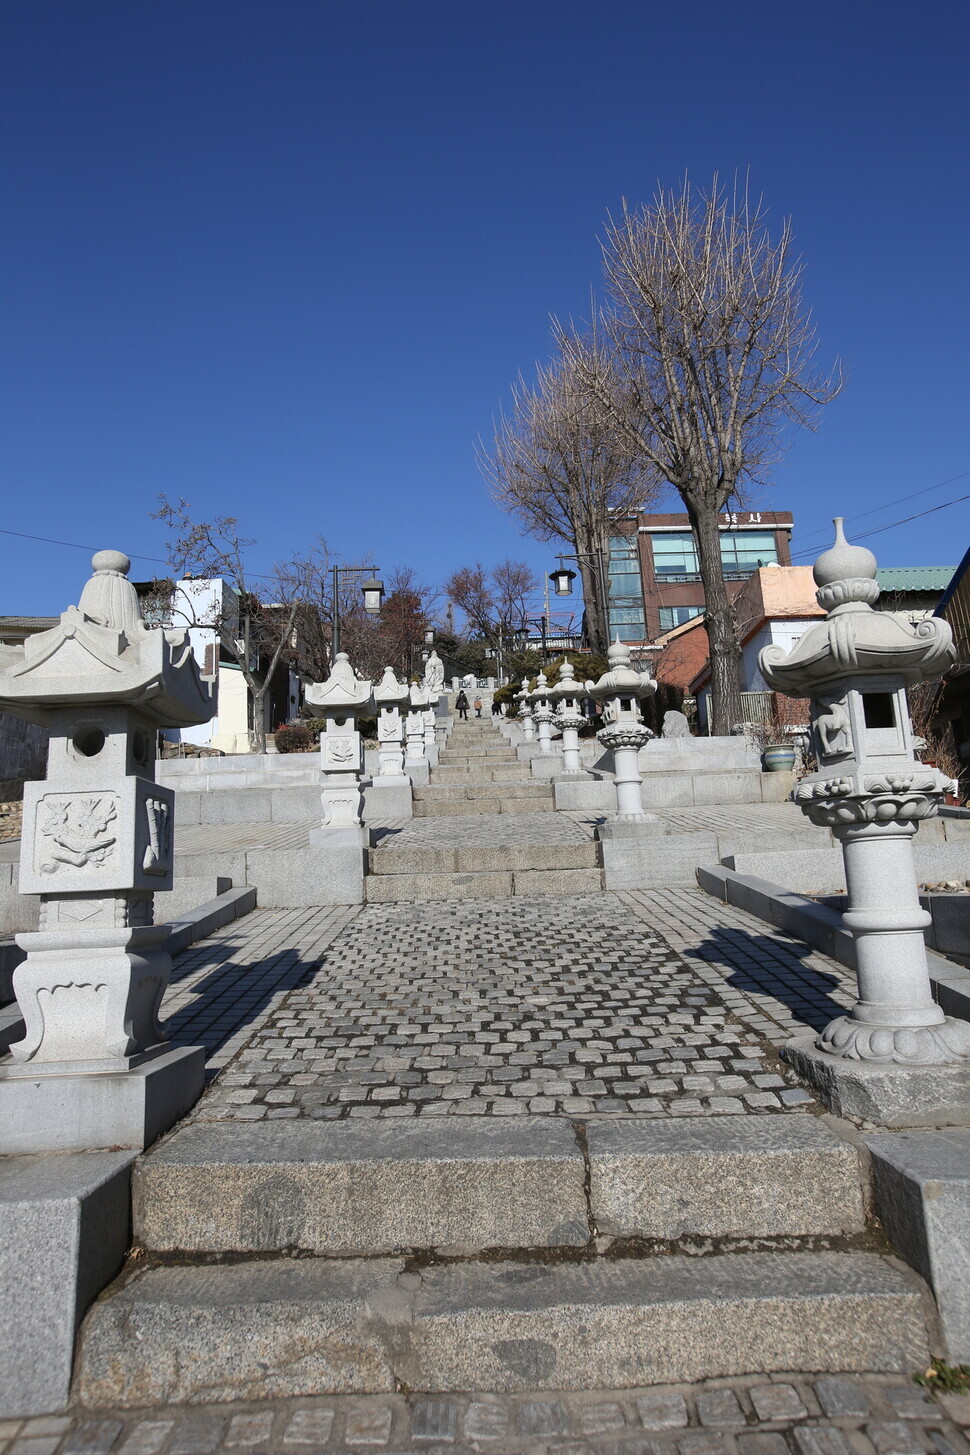 The stairway acts as a border between the Japanese jogyeji, where Japanese people lived, and the Qing Dynasty jogyeji, where the Chinese people lived. (Her Yun-hee/The Hankyoreh)